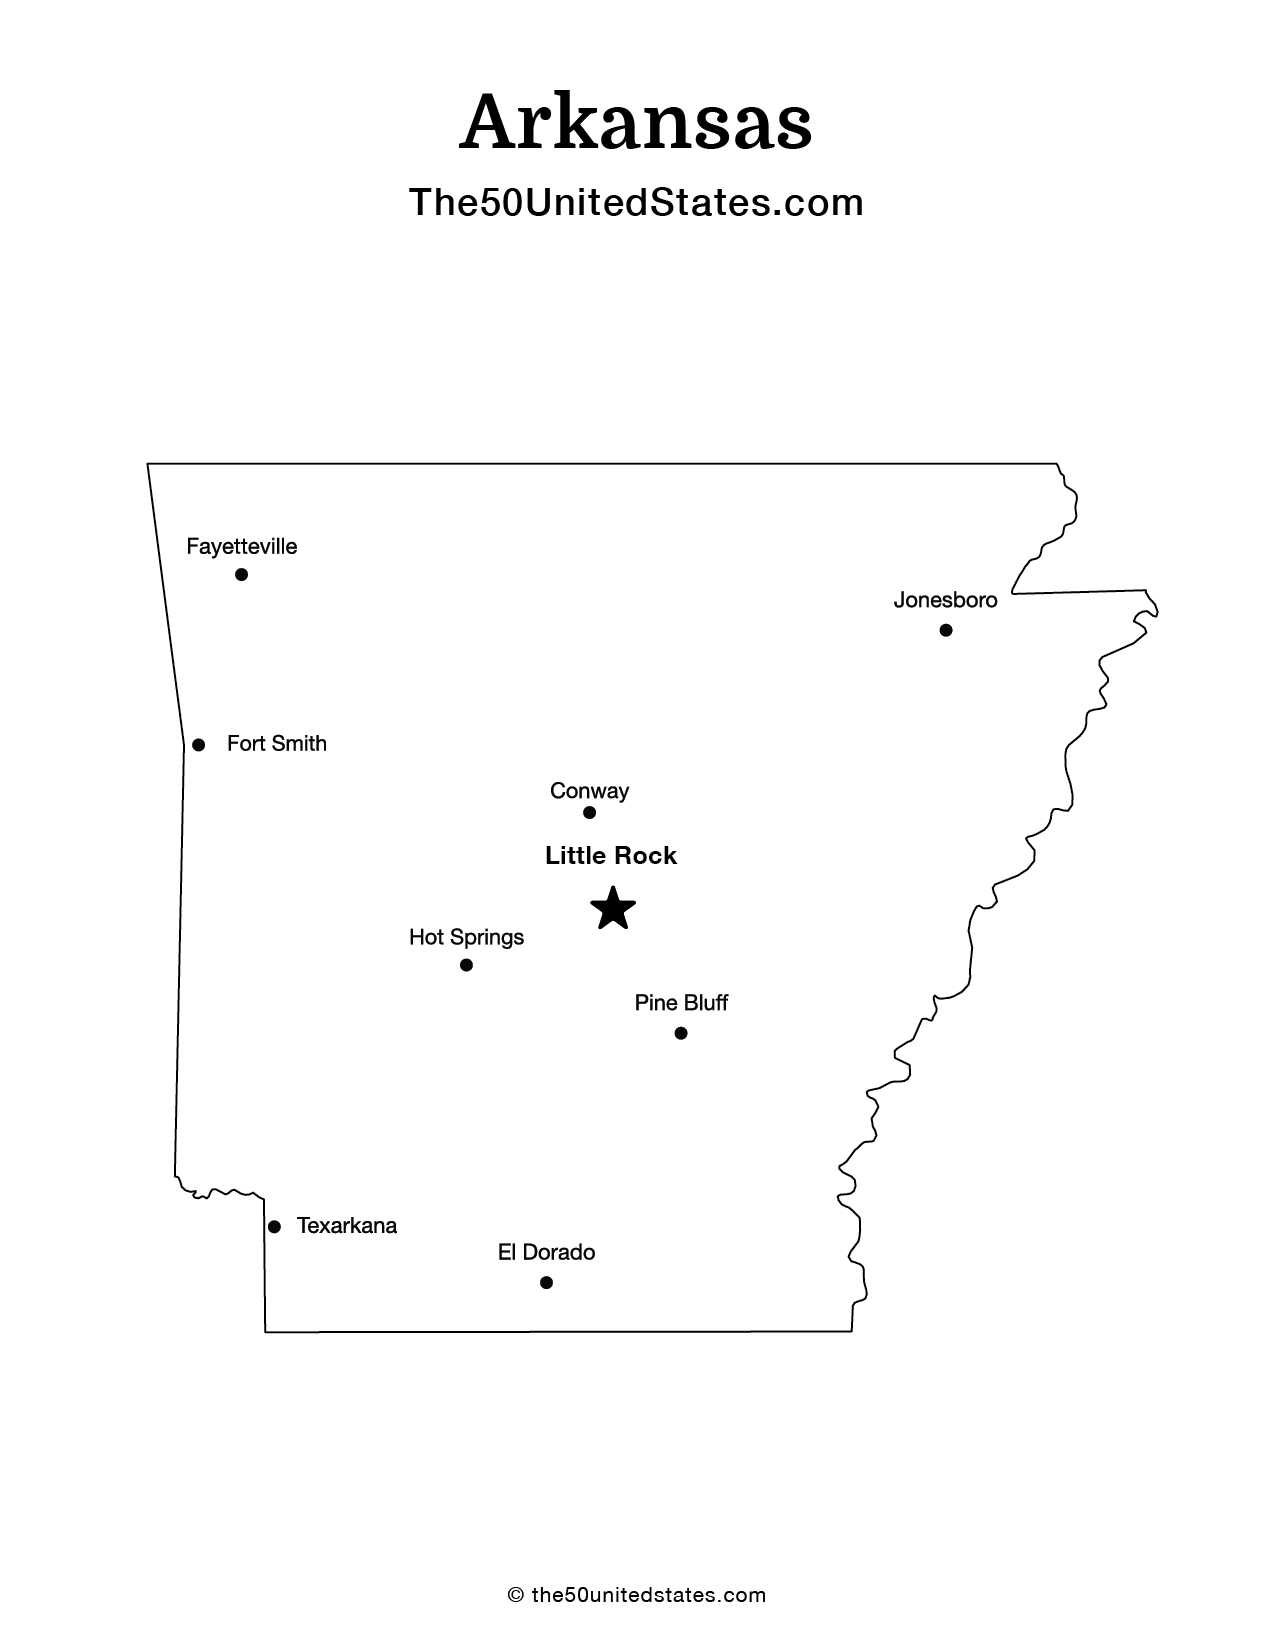 Map of Arkansas with Cities (Labeled)